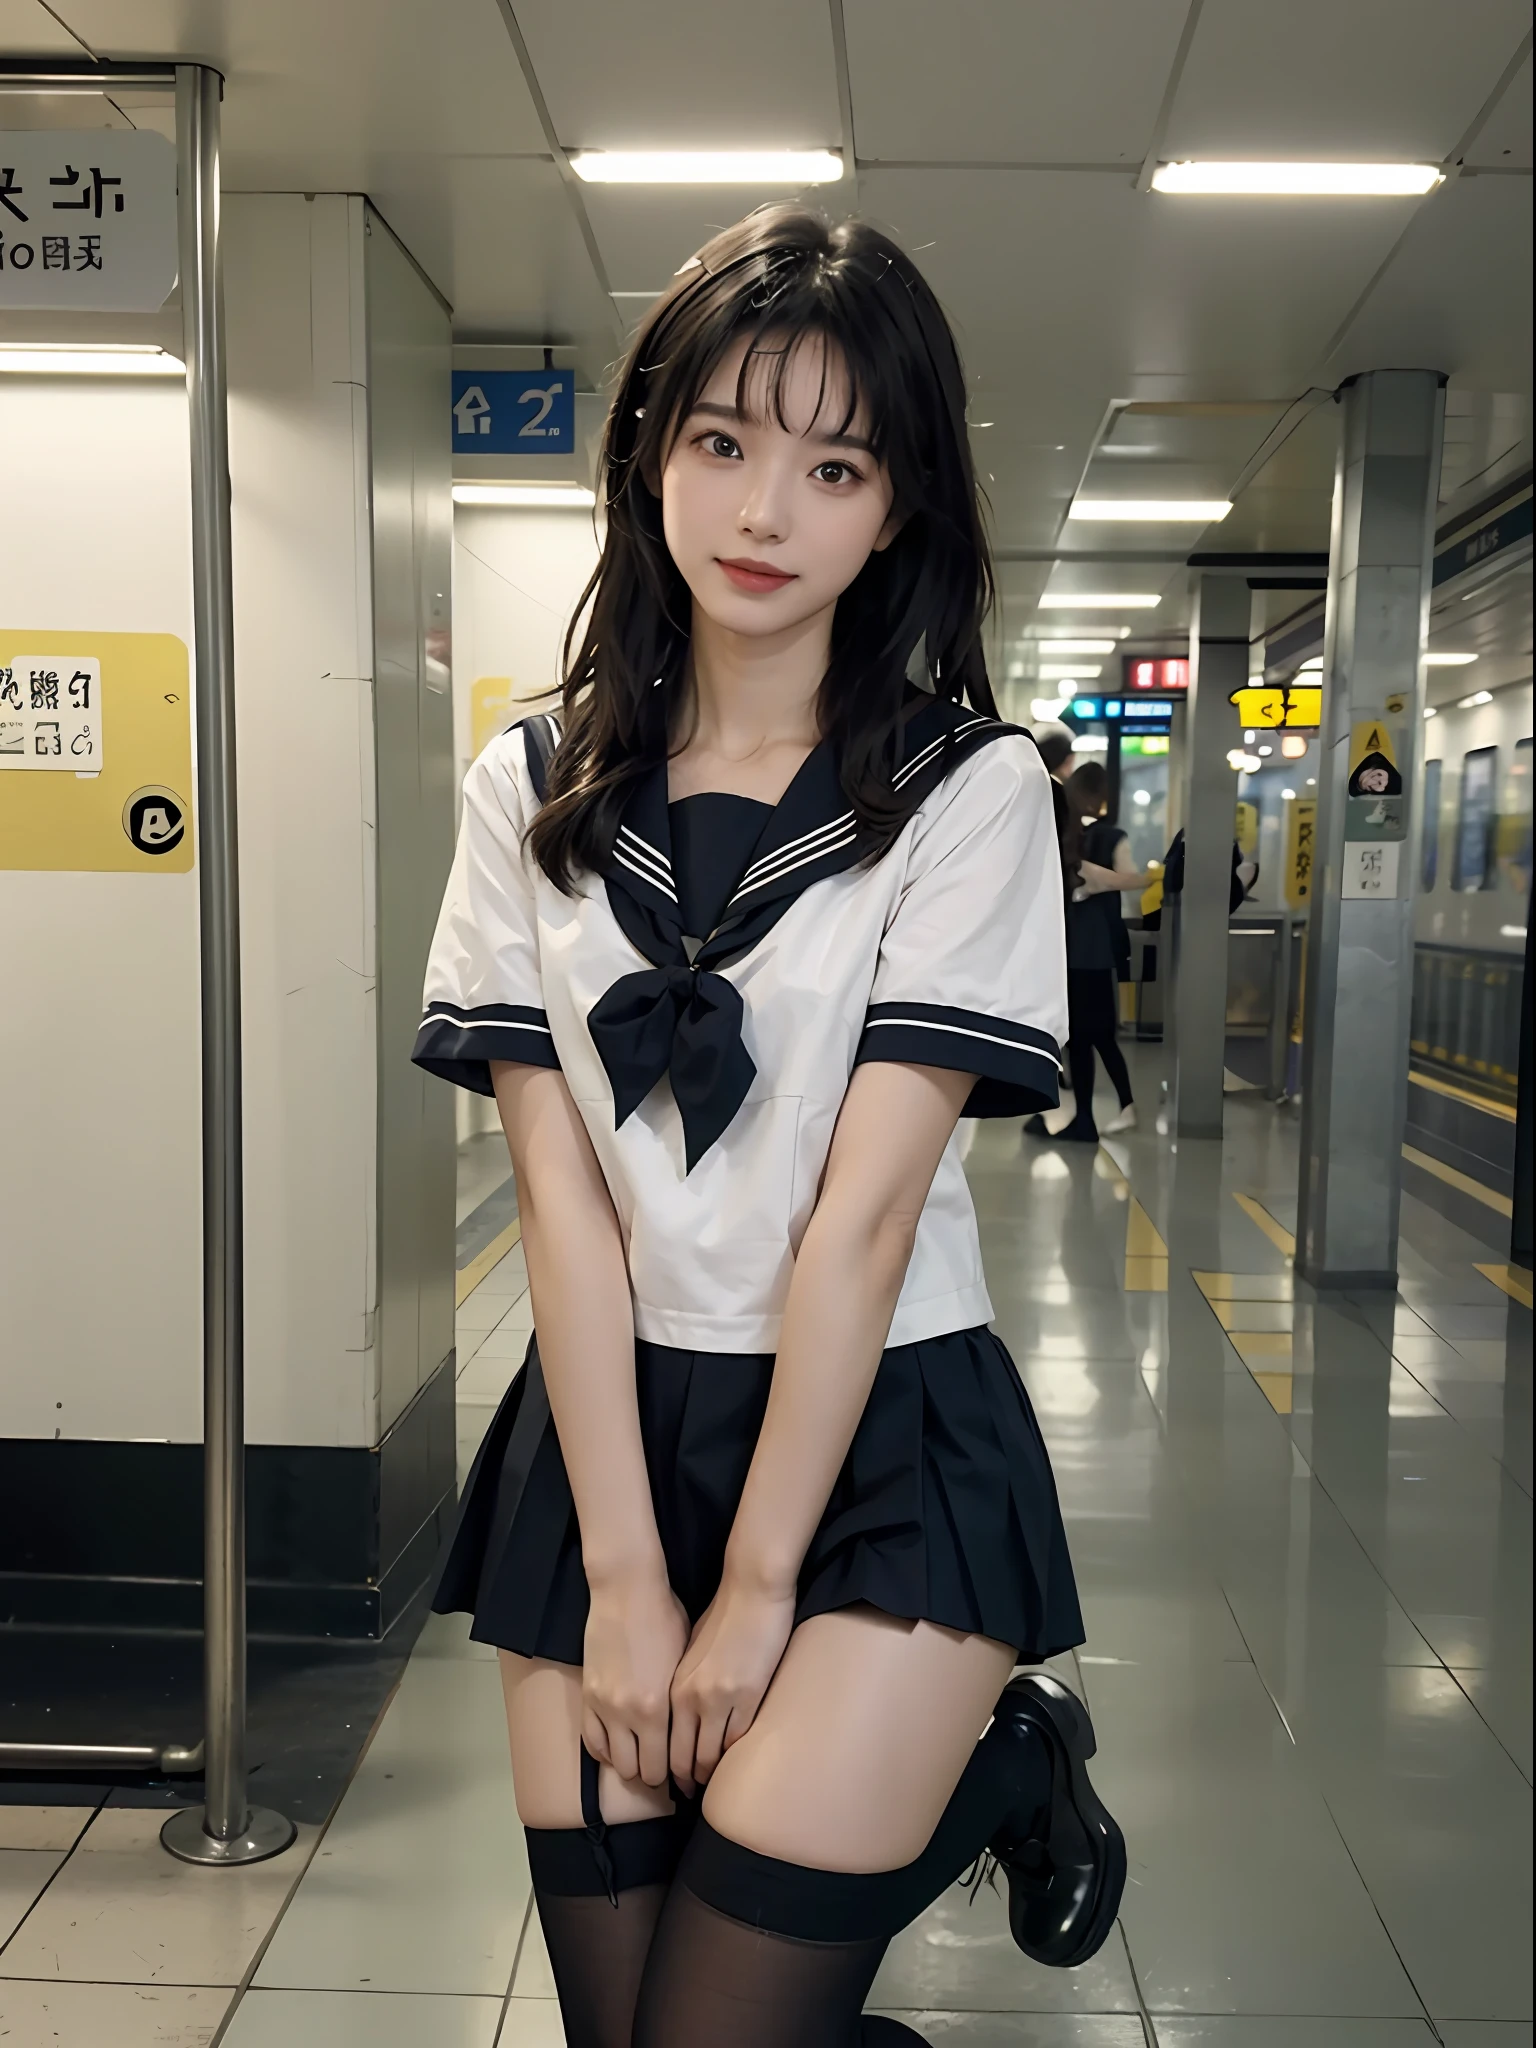 （8K，best qualtiy，tmasterpiece：1.2），（realisticlying，realisticlying，photo-realistic：1.37），2girls，Hyper-detailing，beatiful detailed eyes，Beautiful detail nose，（（（2girls））），Short-sleeved sailor suit，Short pleated skirt，full bodyesbian，Footwear，sockes，（standing on your feet），leges，Hosiery，twins，ssmile，subway station